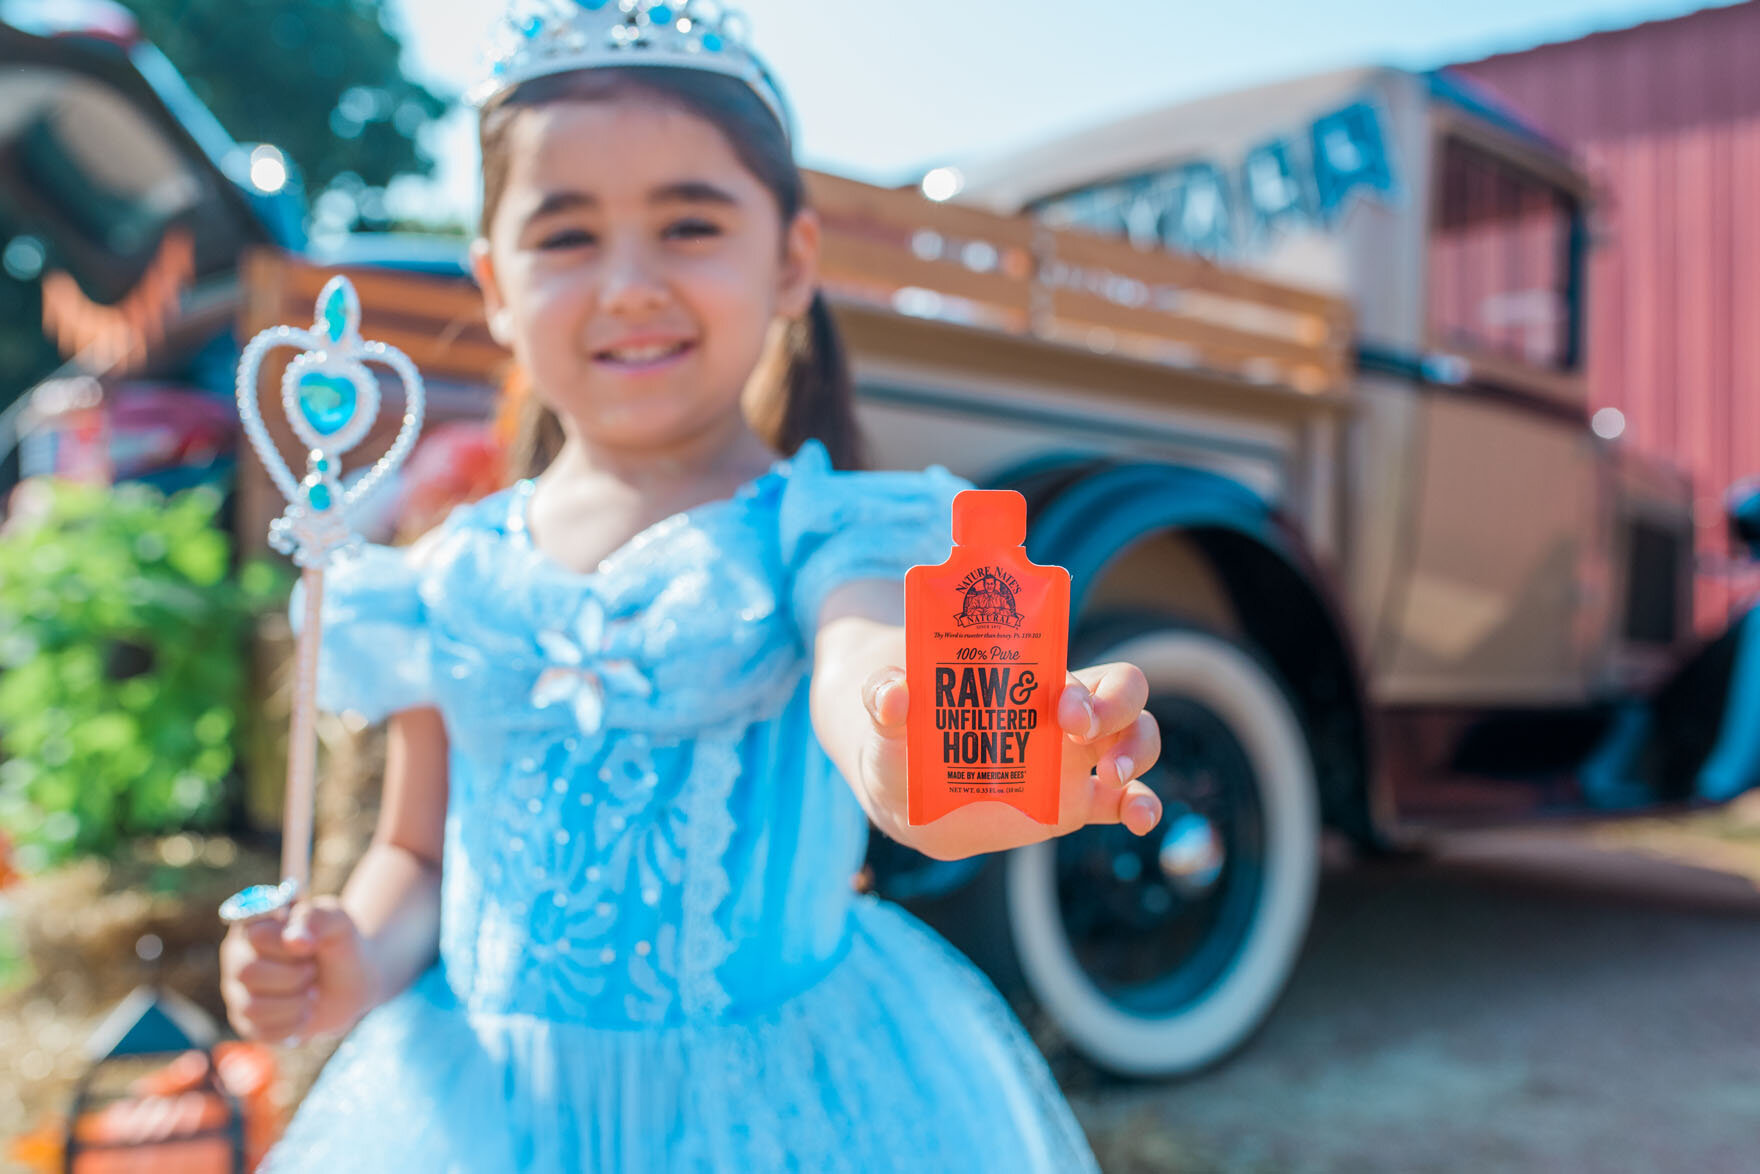 Little girl in a princess costume holding a honey packet standing in front of a restored vintage truck at a fall festival